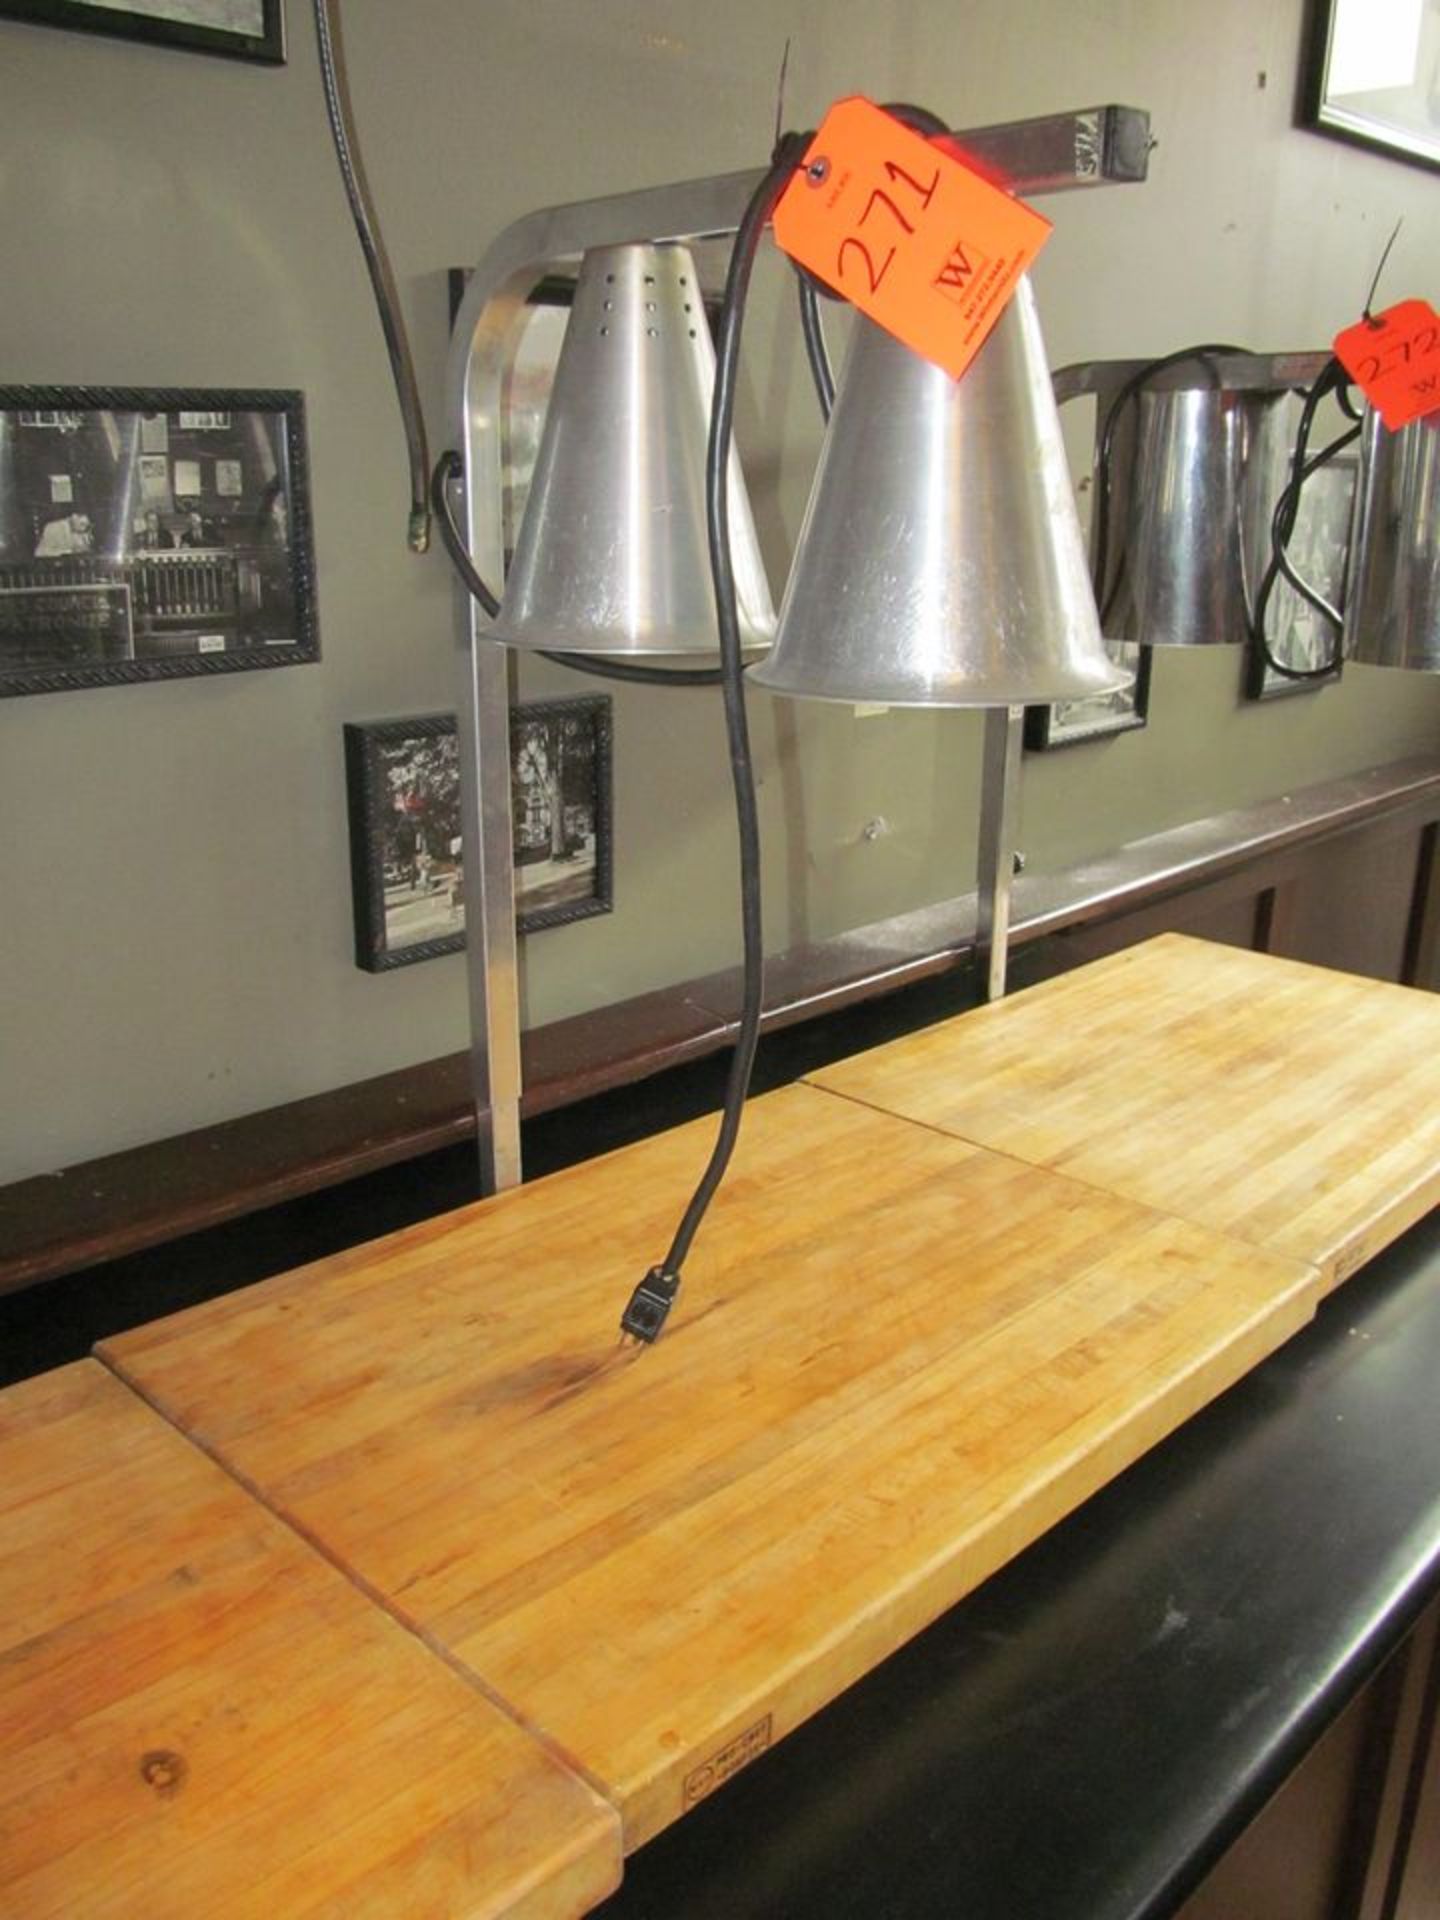 2-Bulb Heating Lamp, with Wood Cutting Board (Bowling Room)